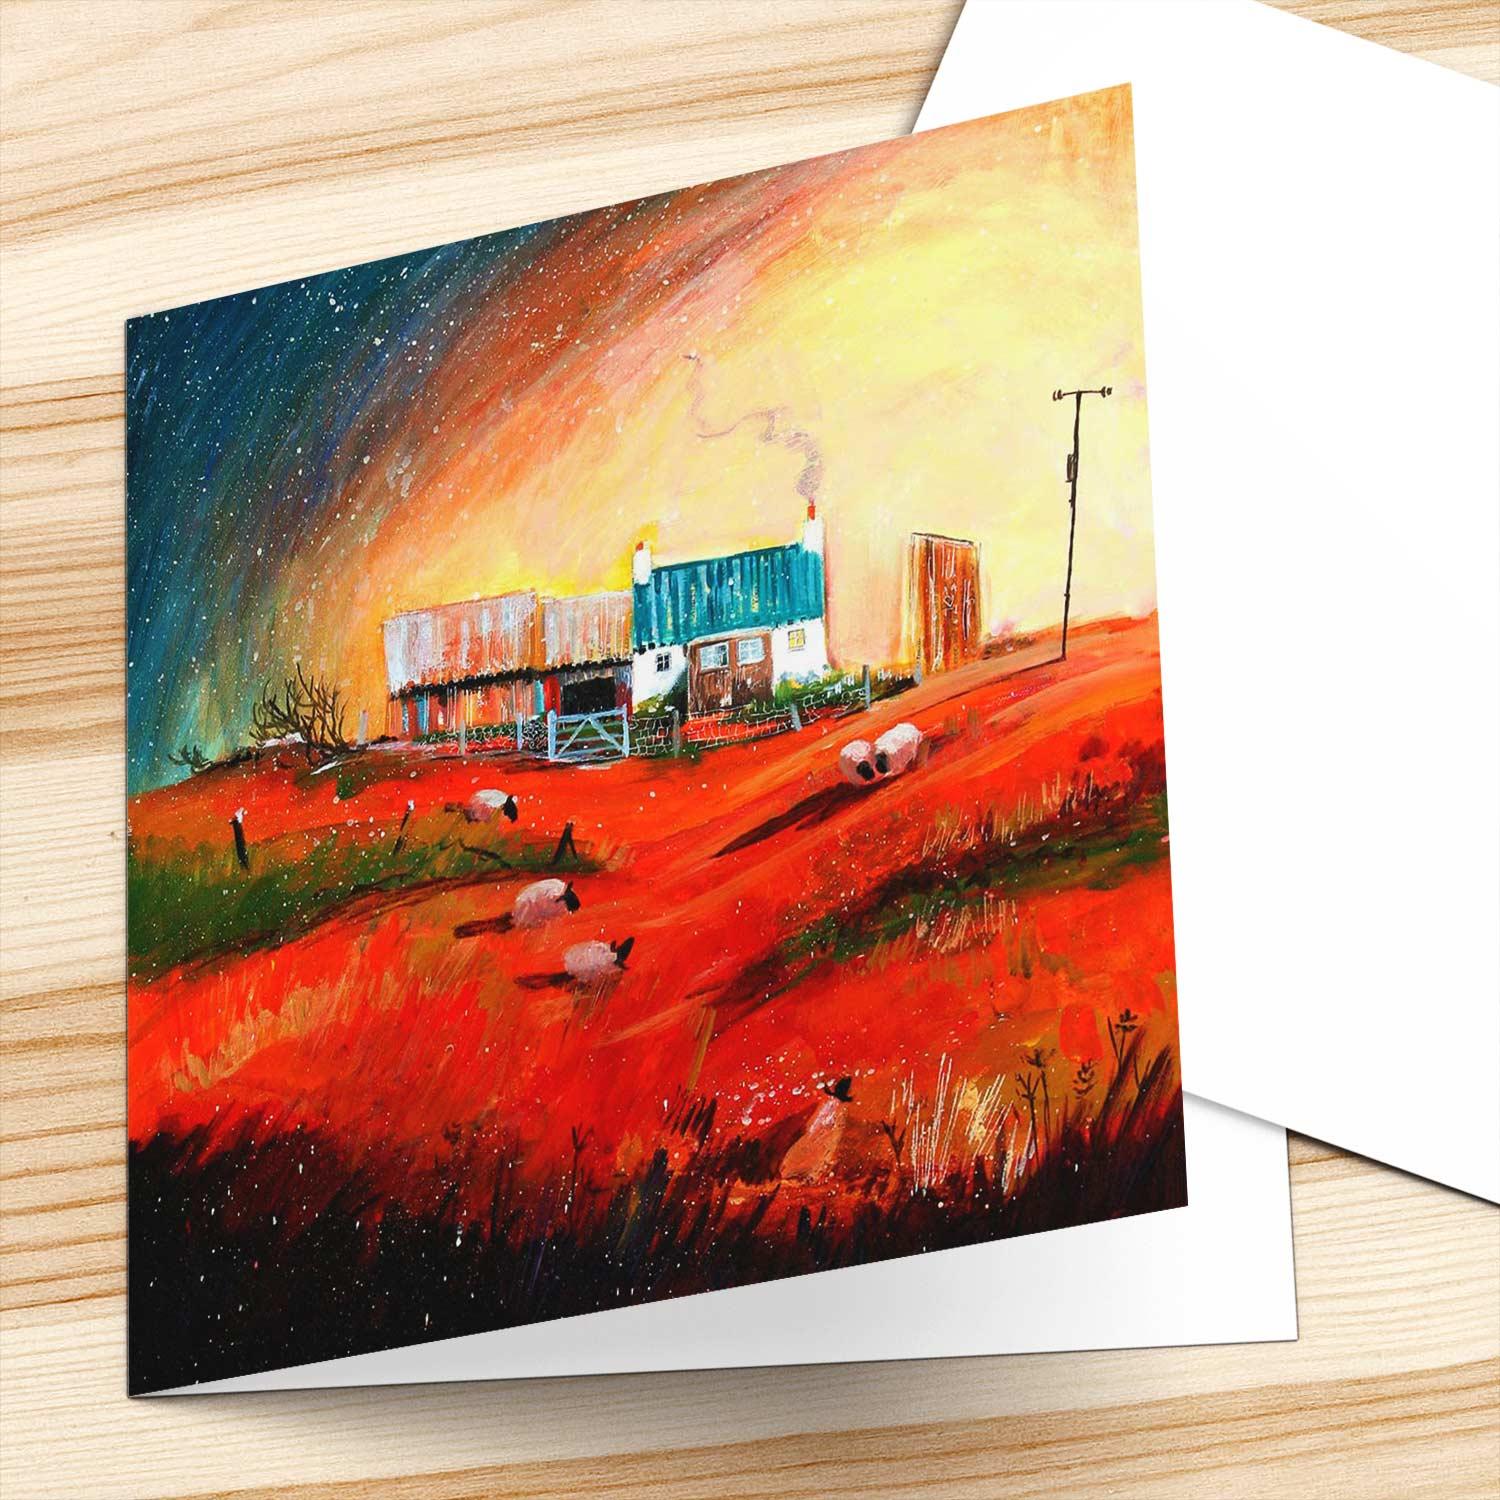 Storm Brewing Greeting Card from an original painting by artist Ann Vastano